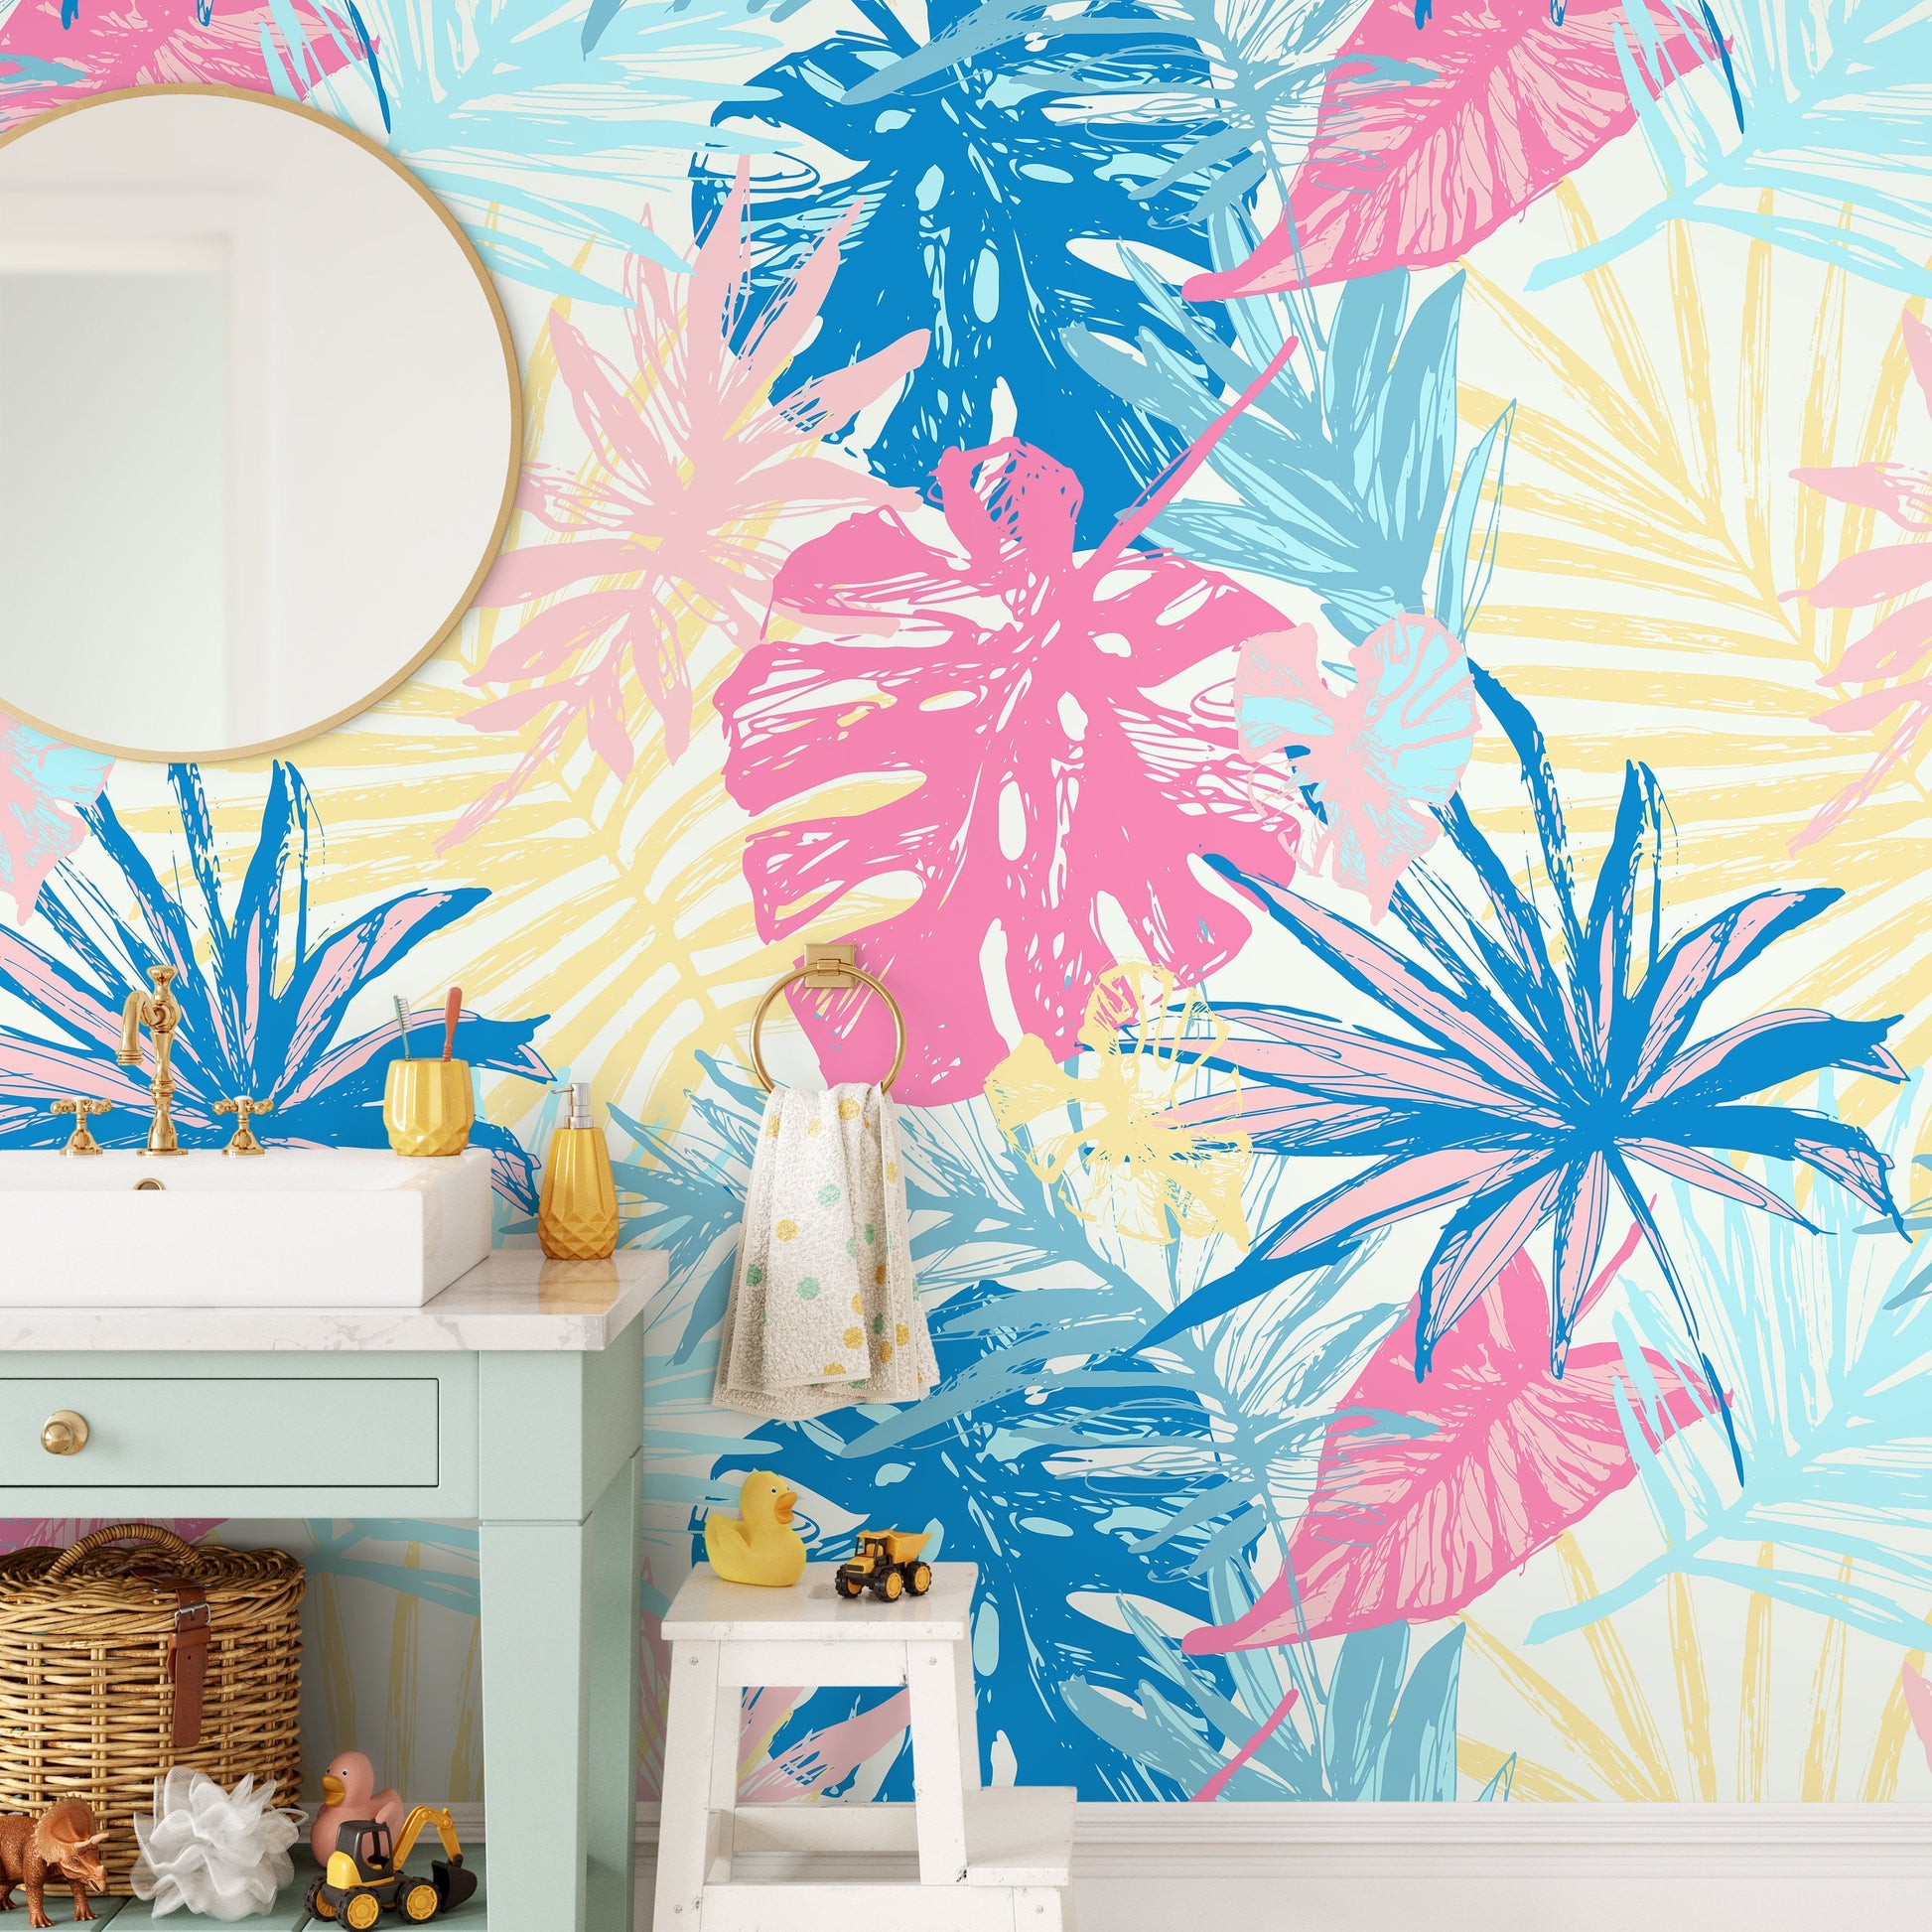 Tropical Self Adhesive Prop Art Removable Wallpaper Tropical Wallpaper Peel and Stick Wall Paper - A652